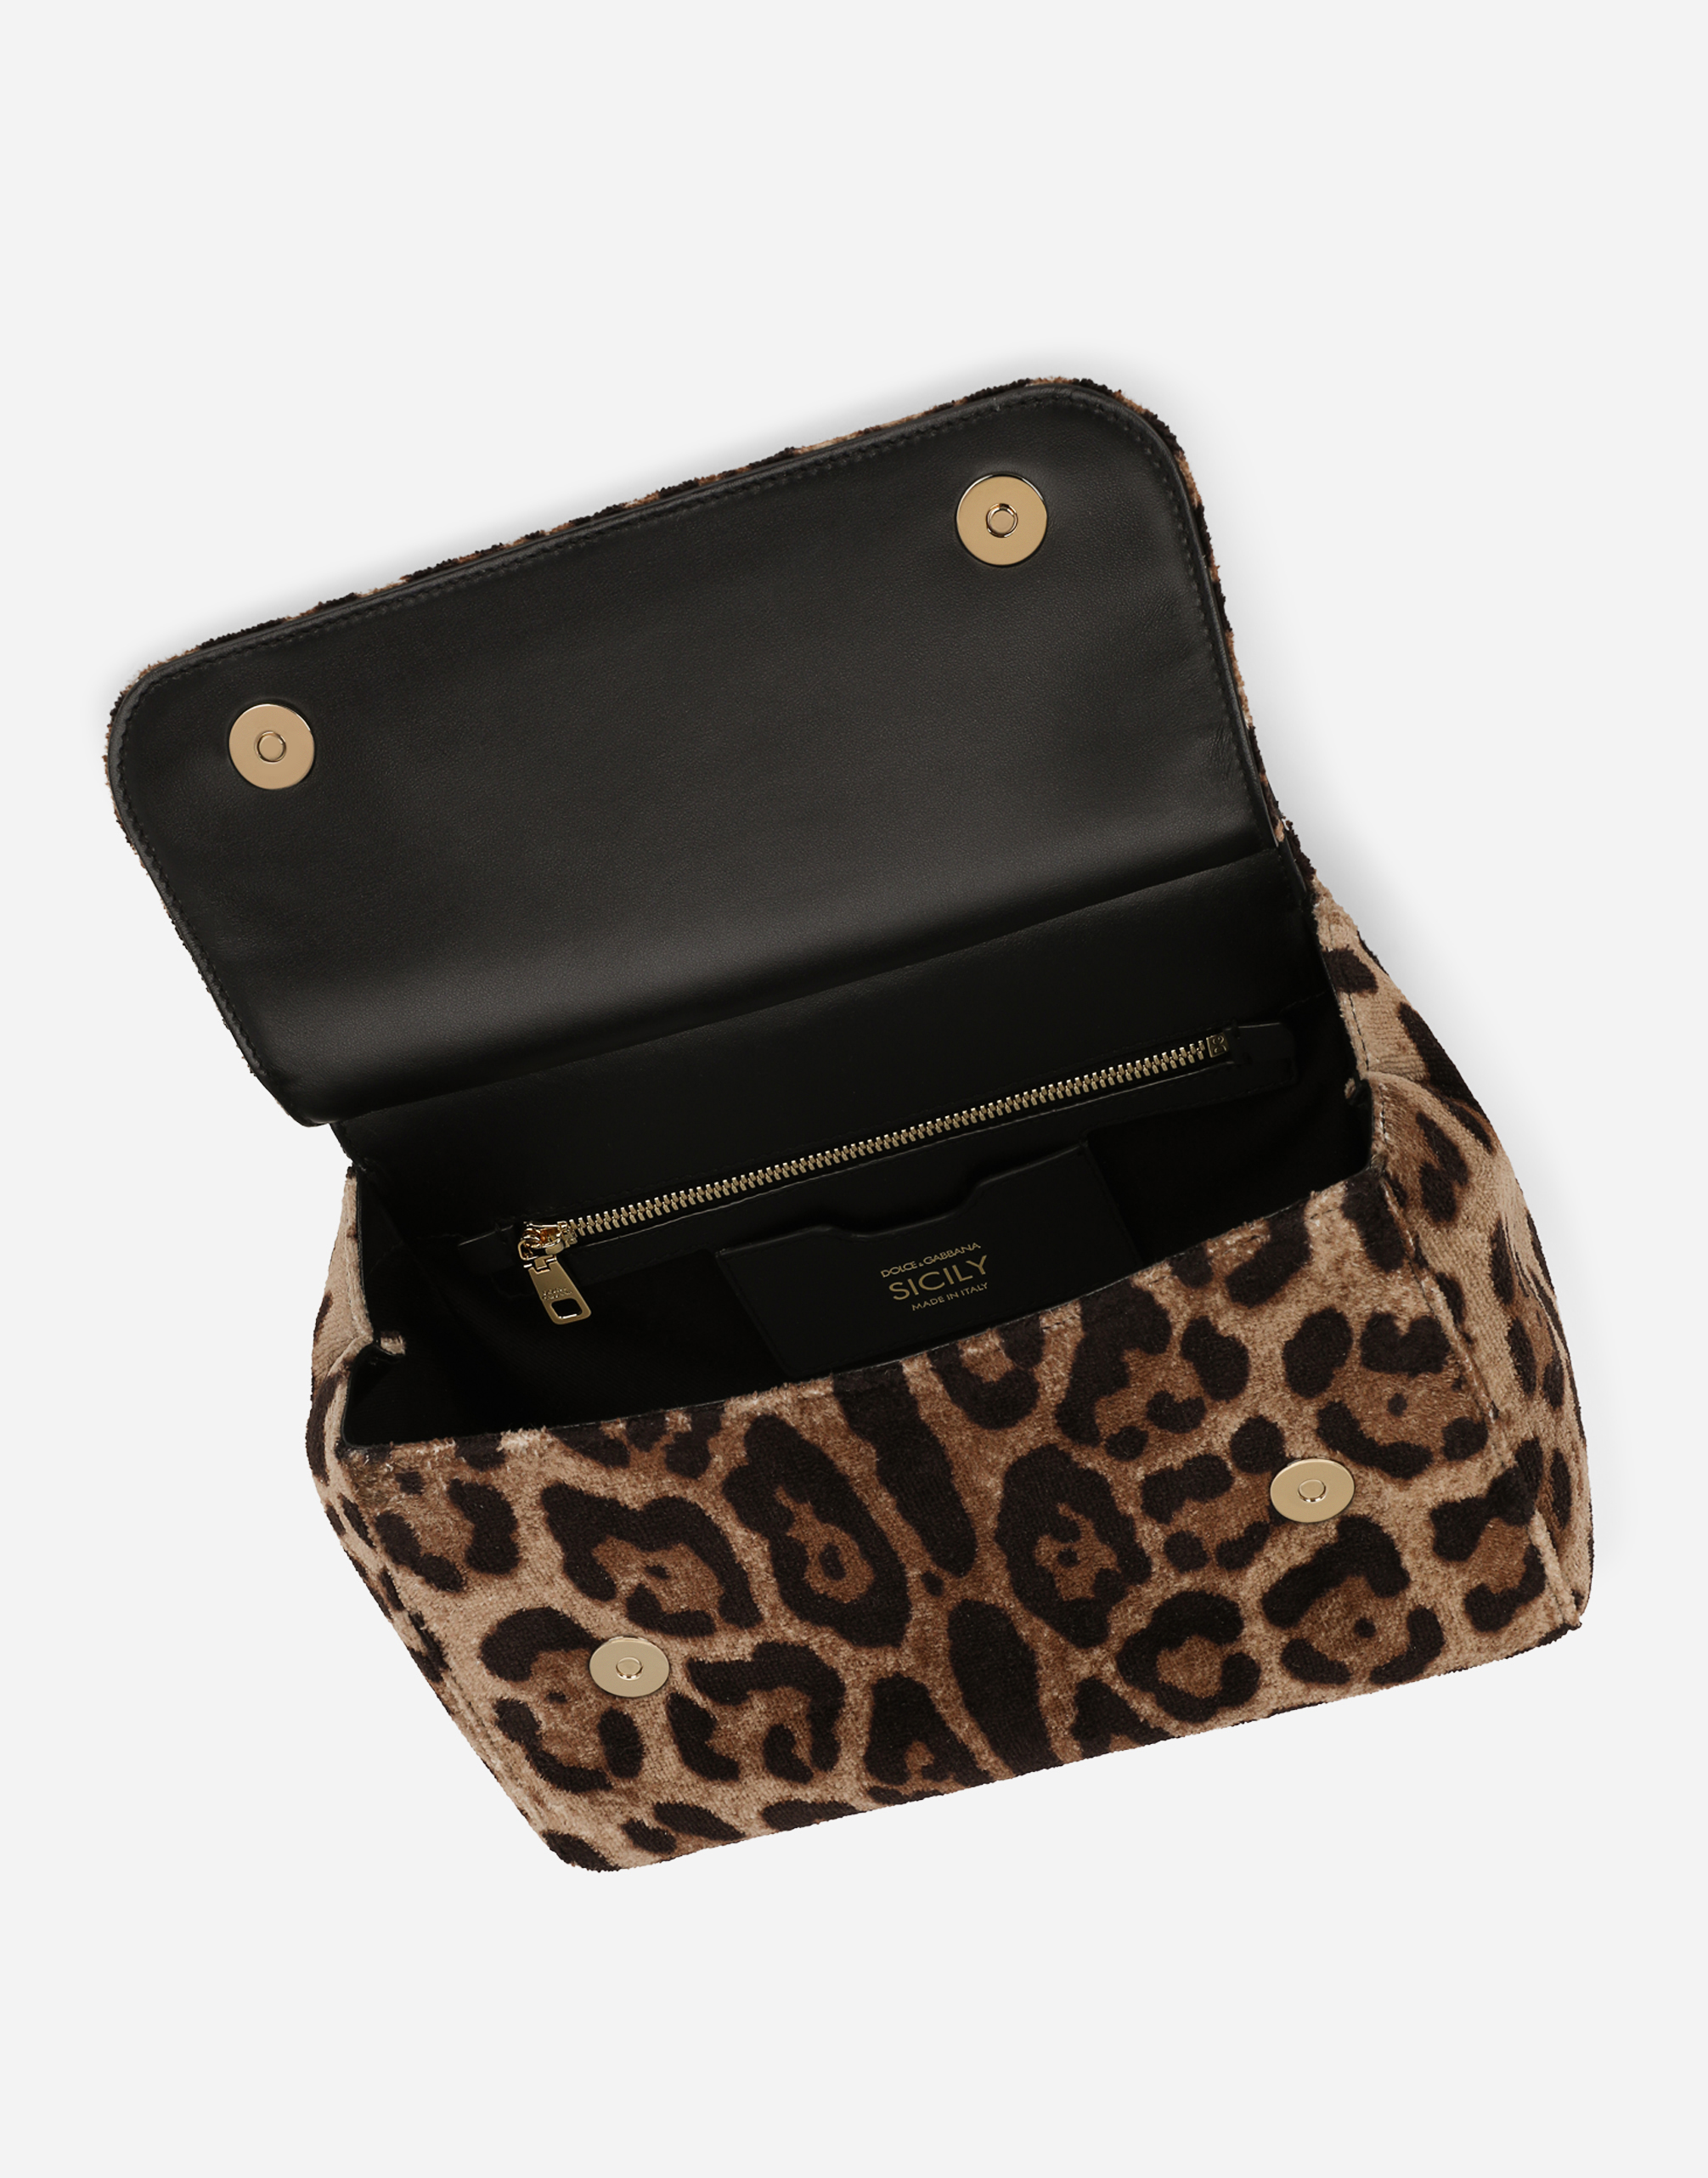 Dolce & Gabbana Leopard Limited Edition Miss Sicily Bag – The